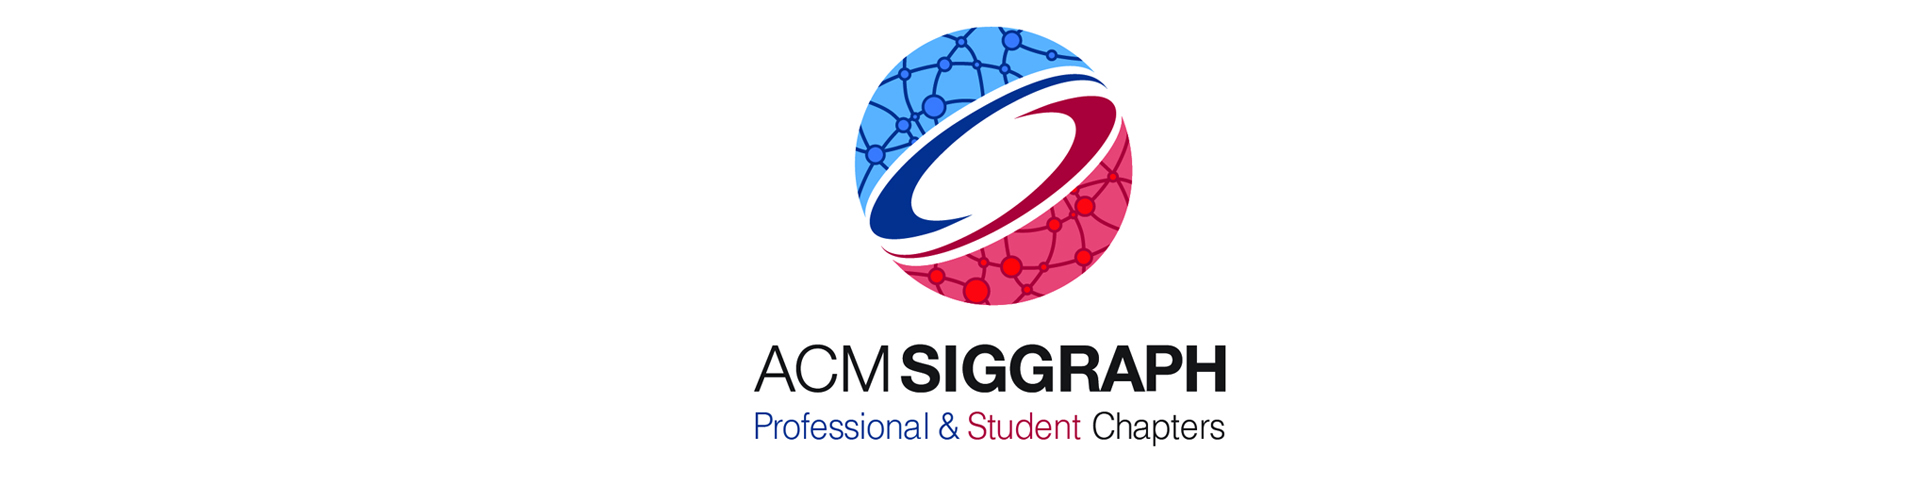 Professional and Student Chapters Committee Logo